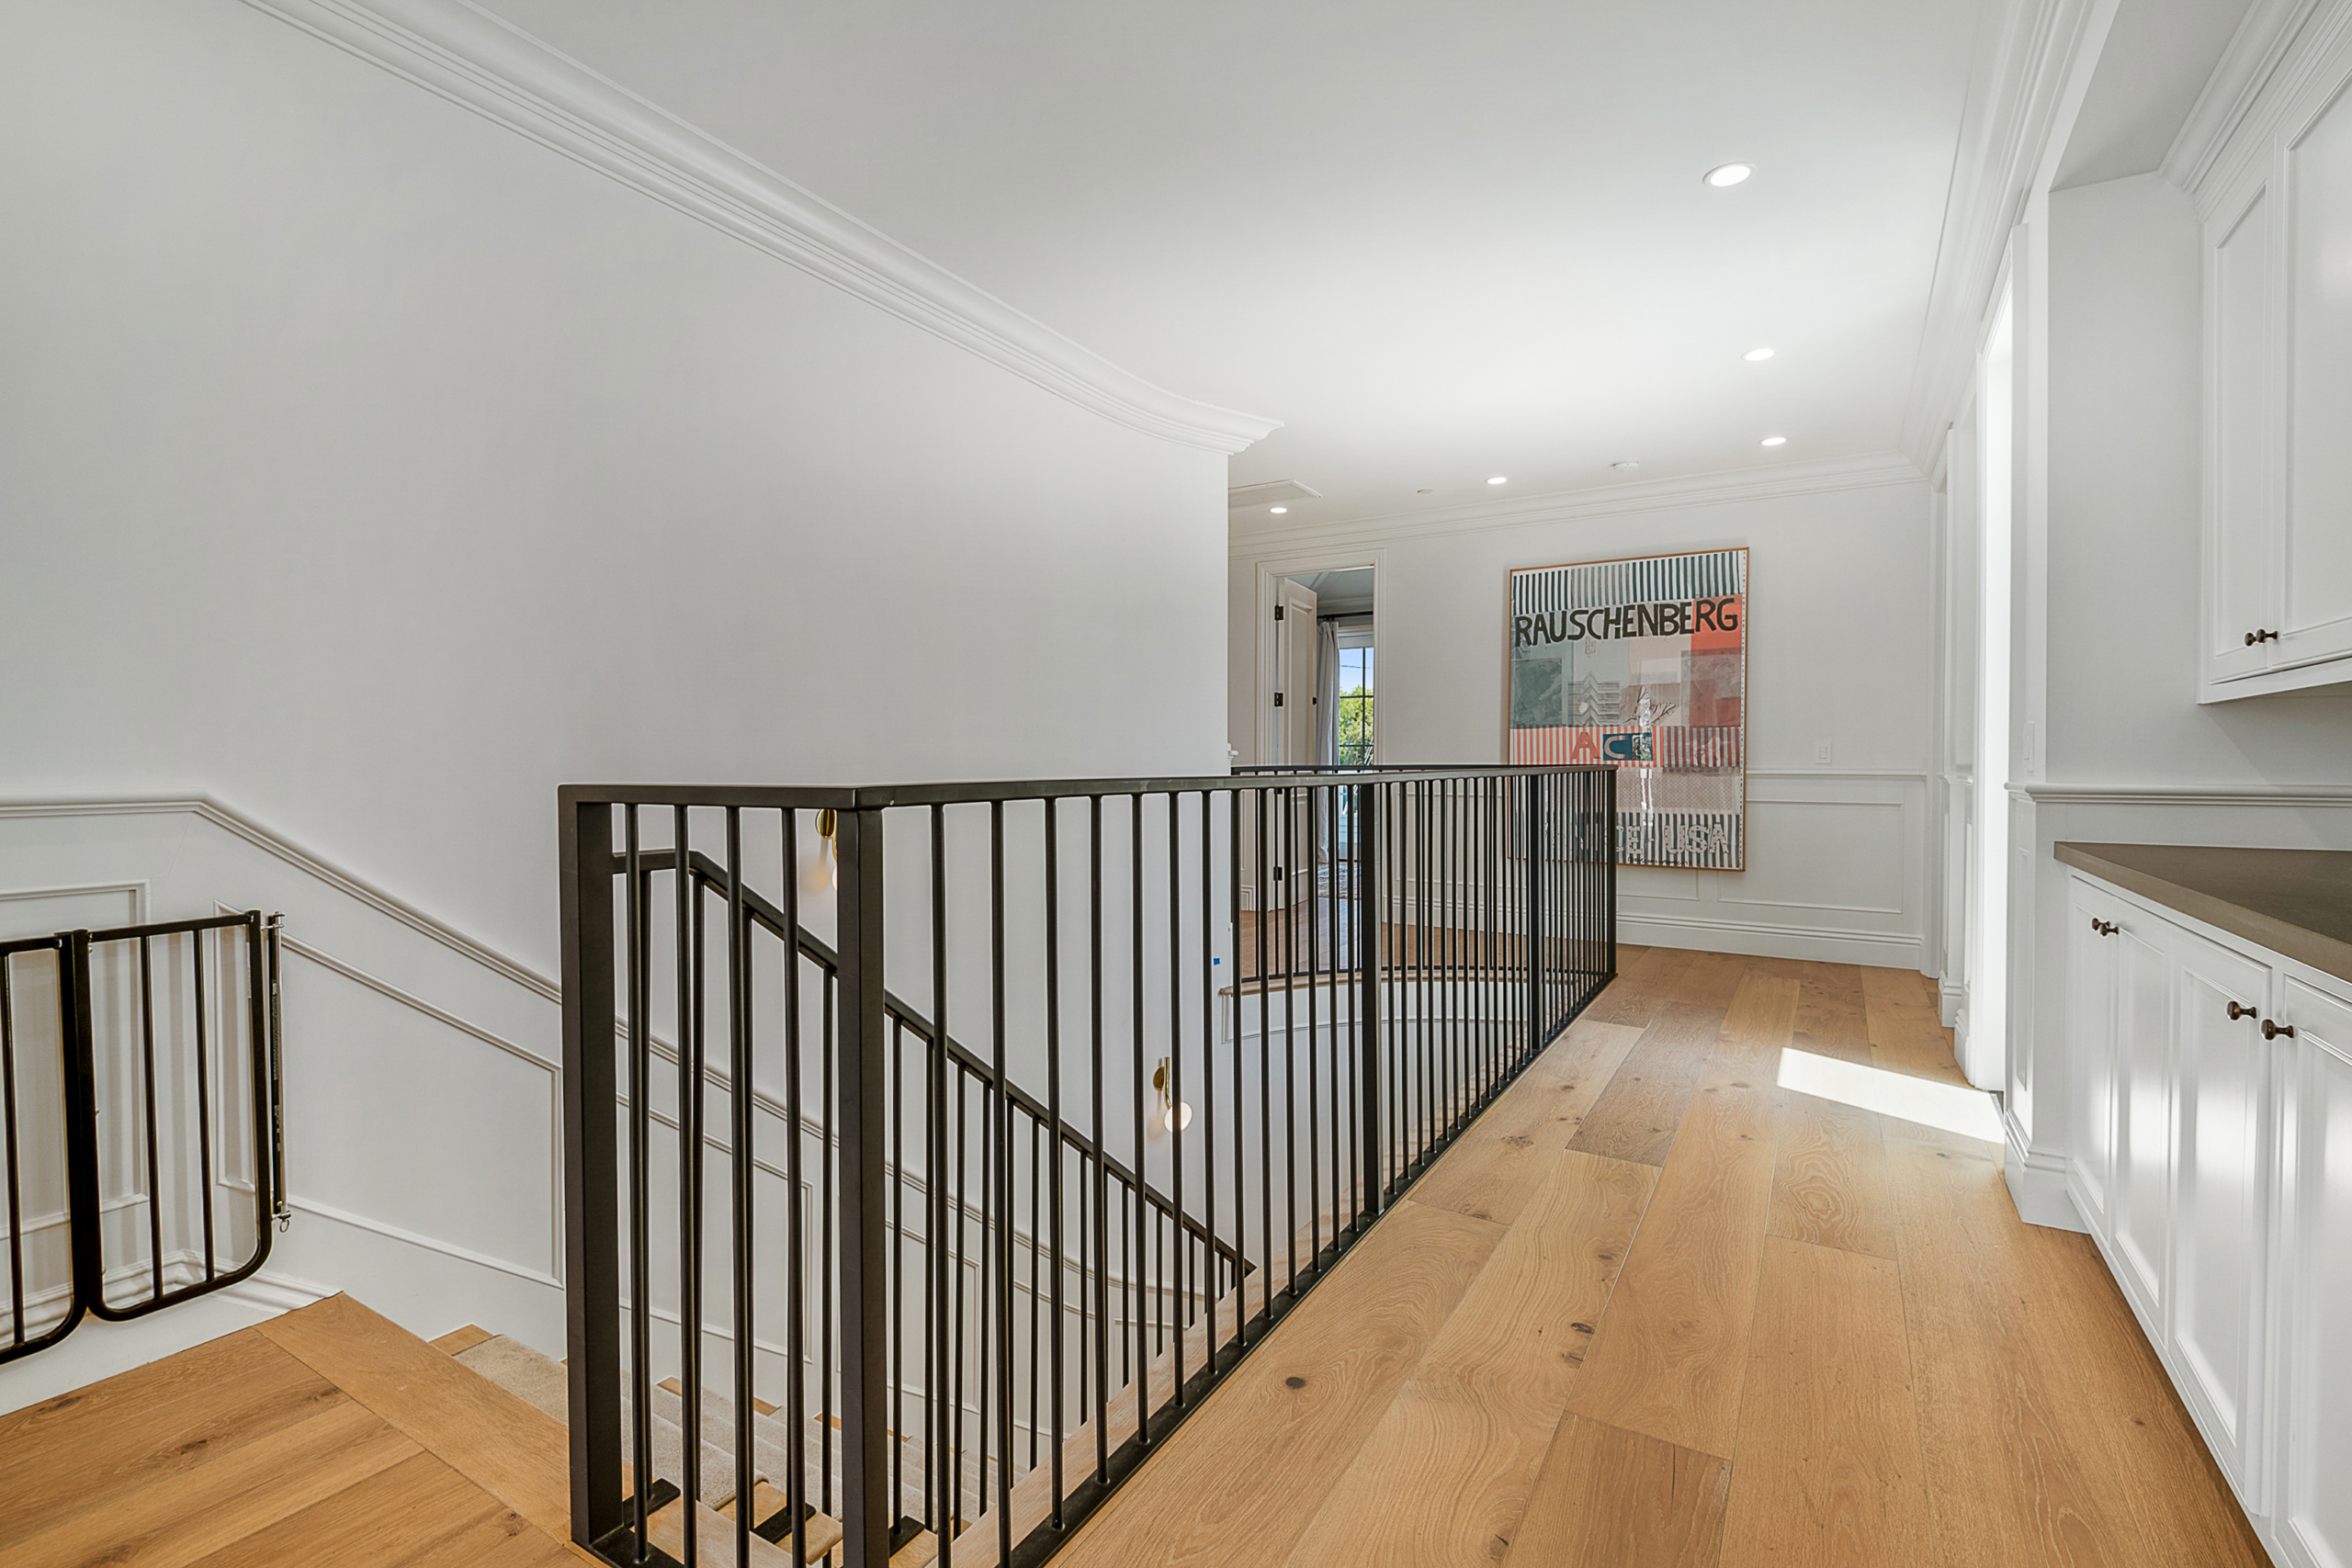 Dark metal staircase with safety gate at top of stairs an long hallway with built-in cabinets